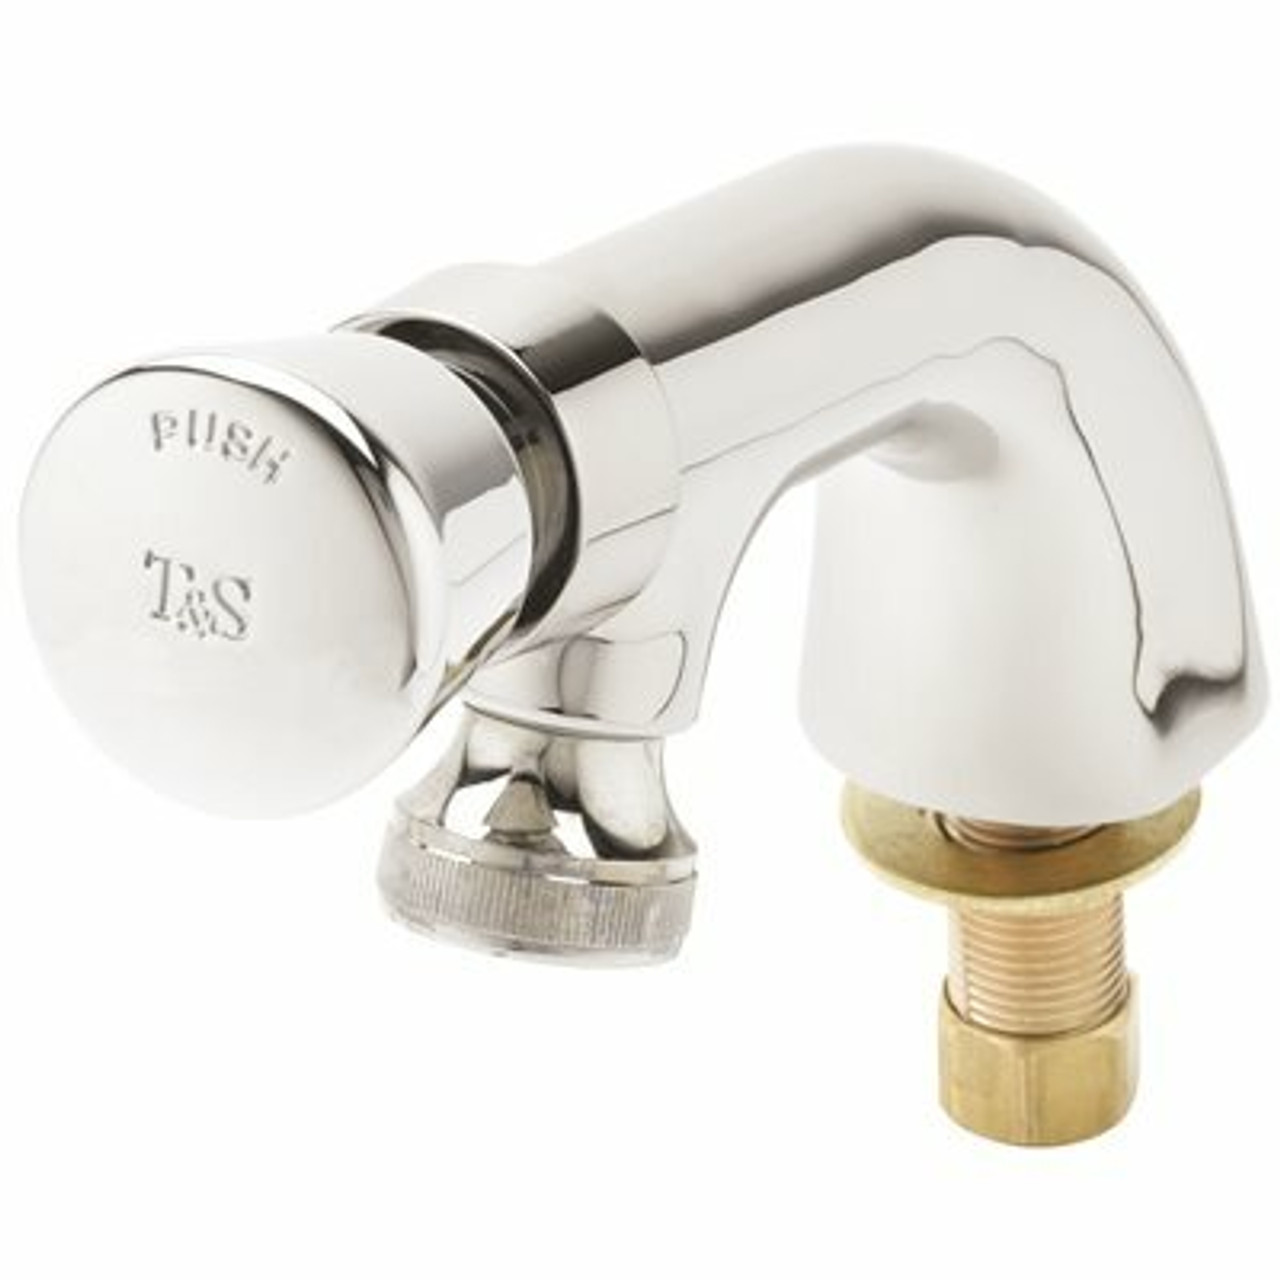 T&S Single Temperature Metering Faucet With Push Button Cap And Rose Spray Outlet, 1/2 In. Npt Male Shank